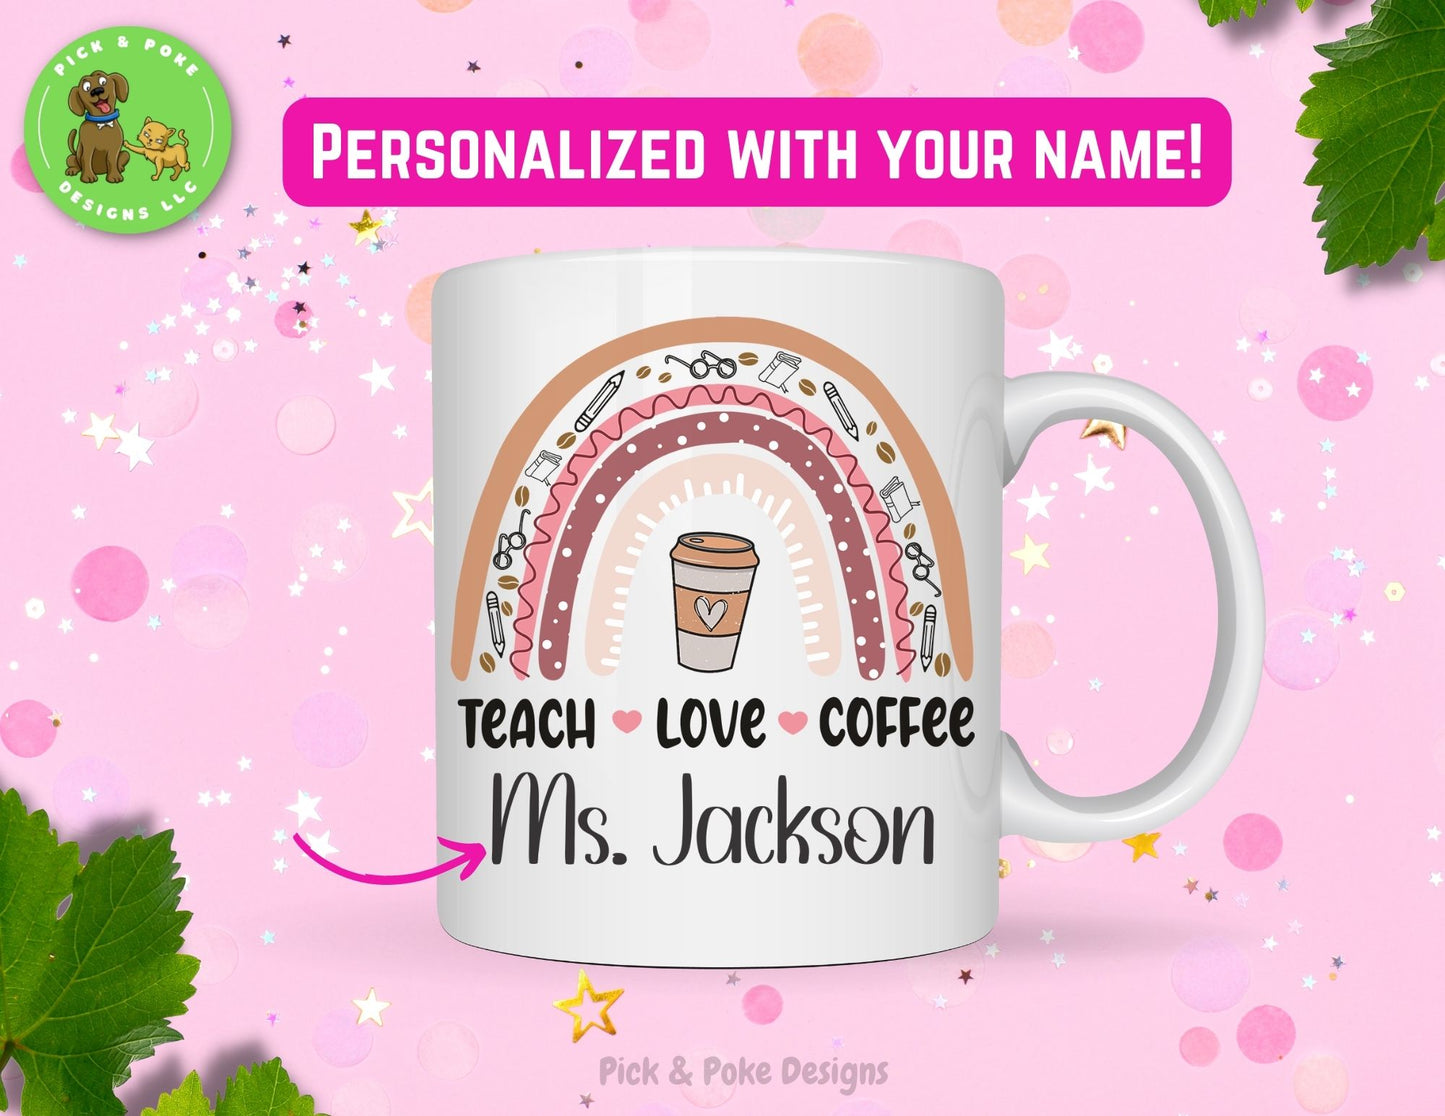 Rainbow Teach Love Coffee ceramic mug is personalized with your name.